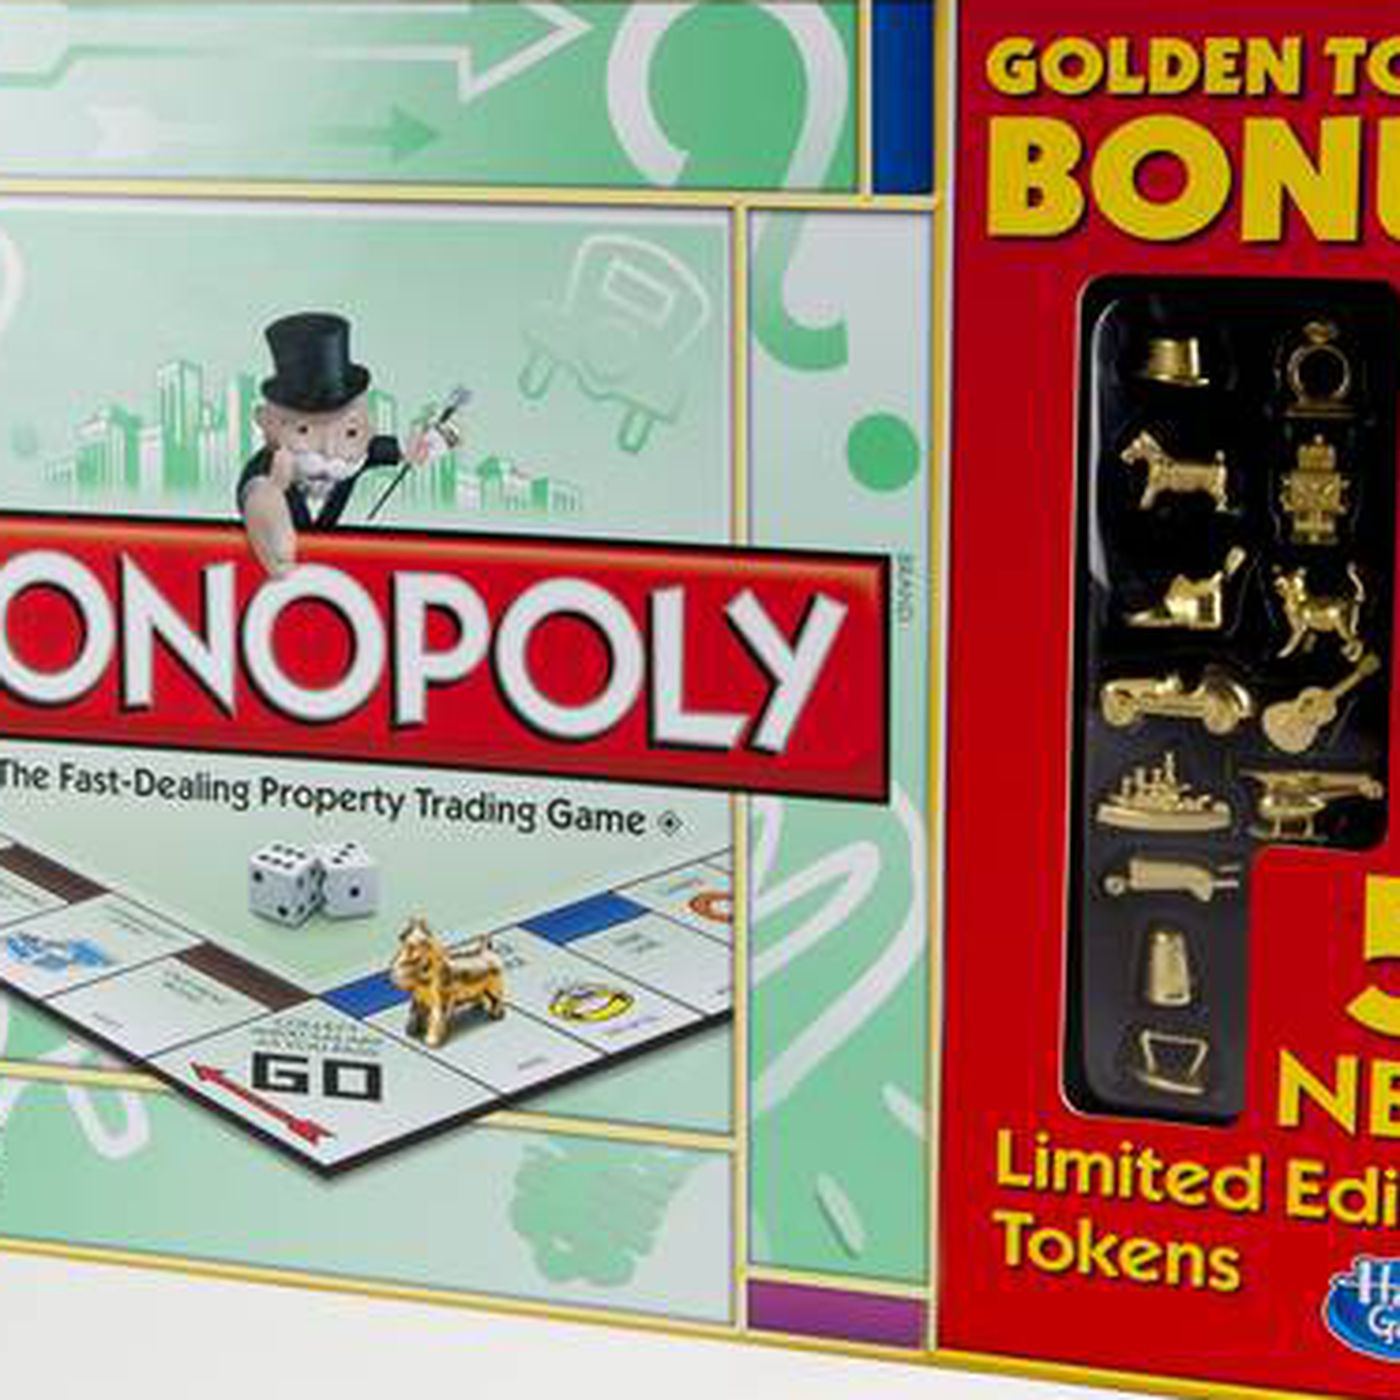 TOKENS MONOPOLY STAR WARS "ORIGINAL" REPLACEMENT GAME PARTS BOARD MONEY + 